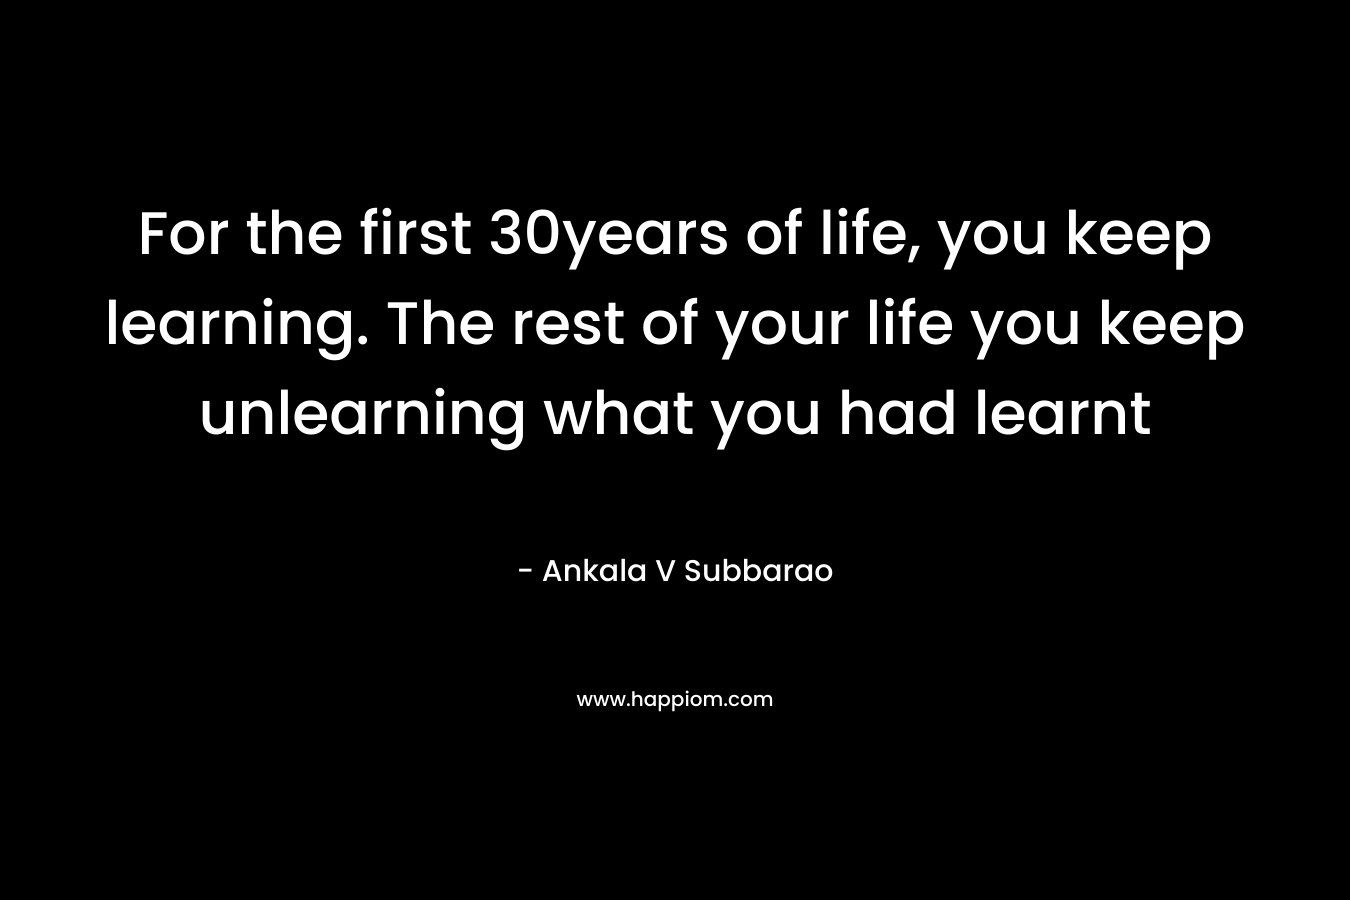 For the first 30years of life, you keep learning. The rest of your life you keep unlearning what you had learnt – Ankala V Subbarao